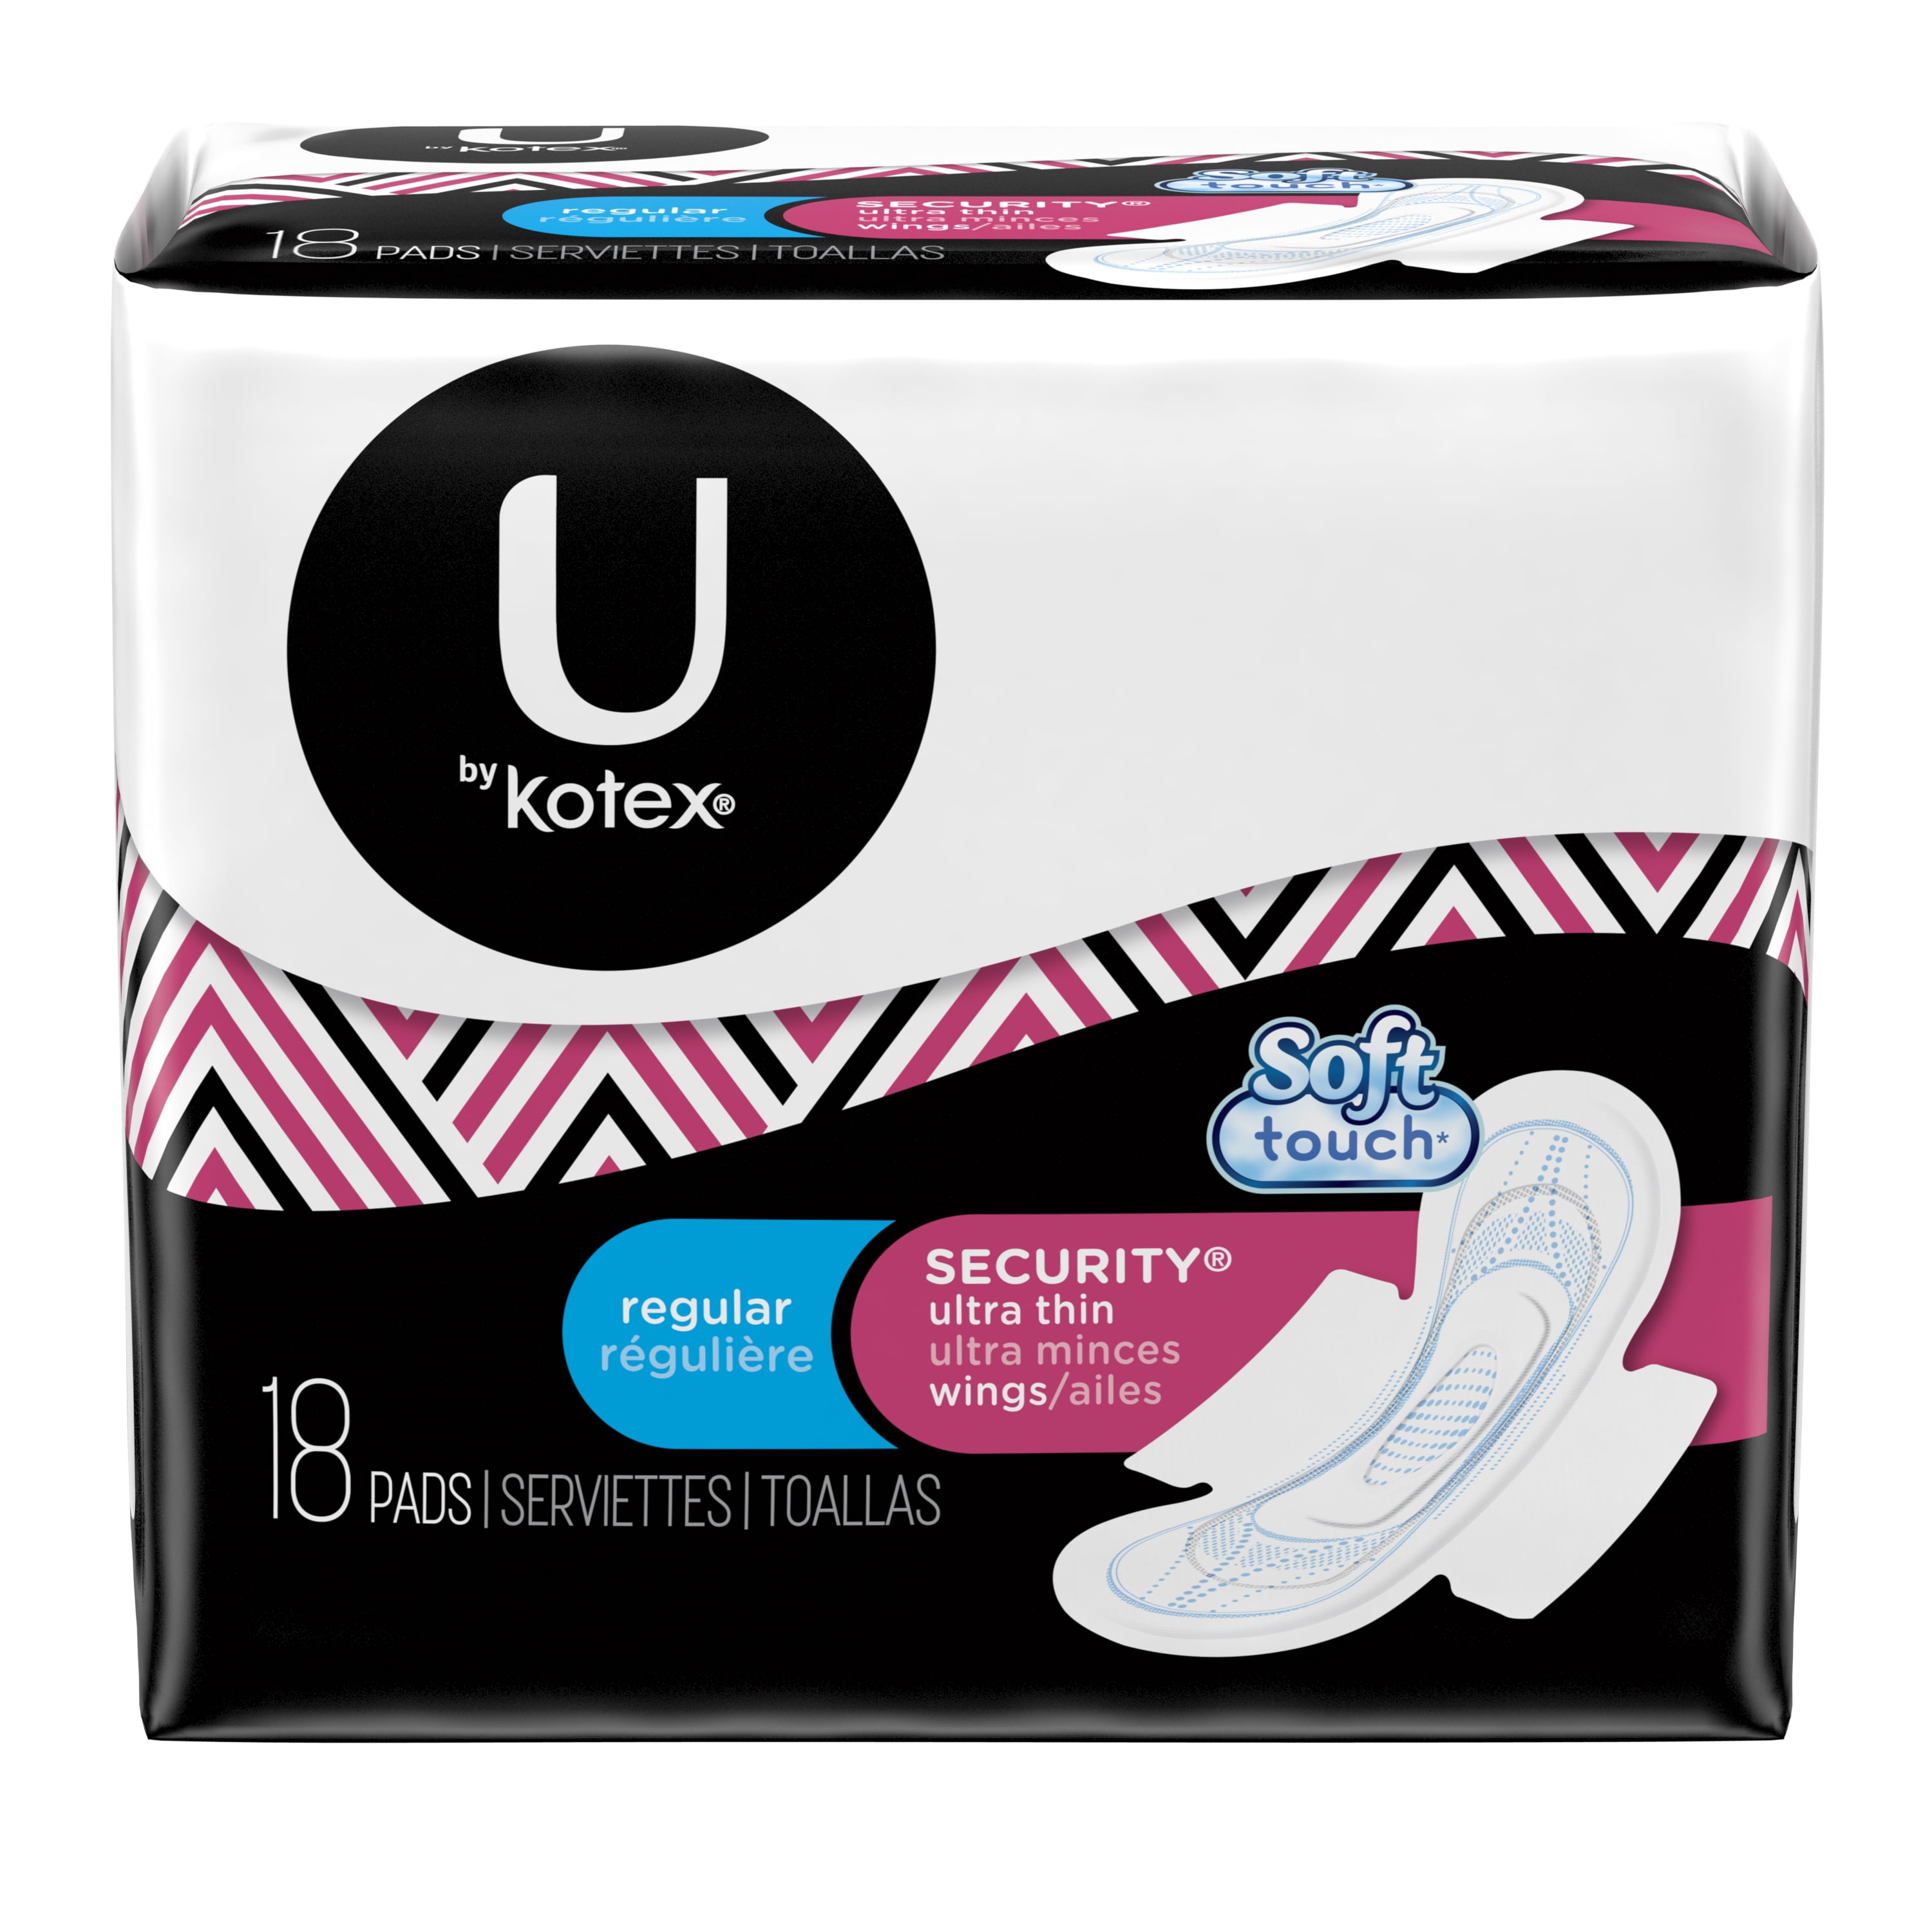  U by Kotex Security Ultra Thin Overnight Pads with